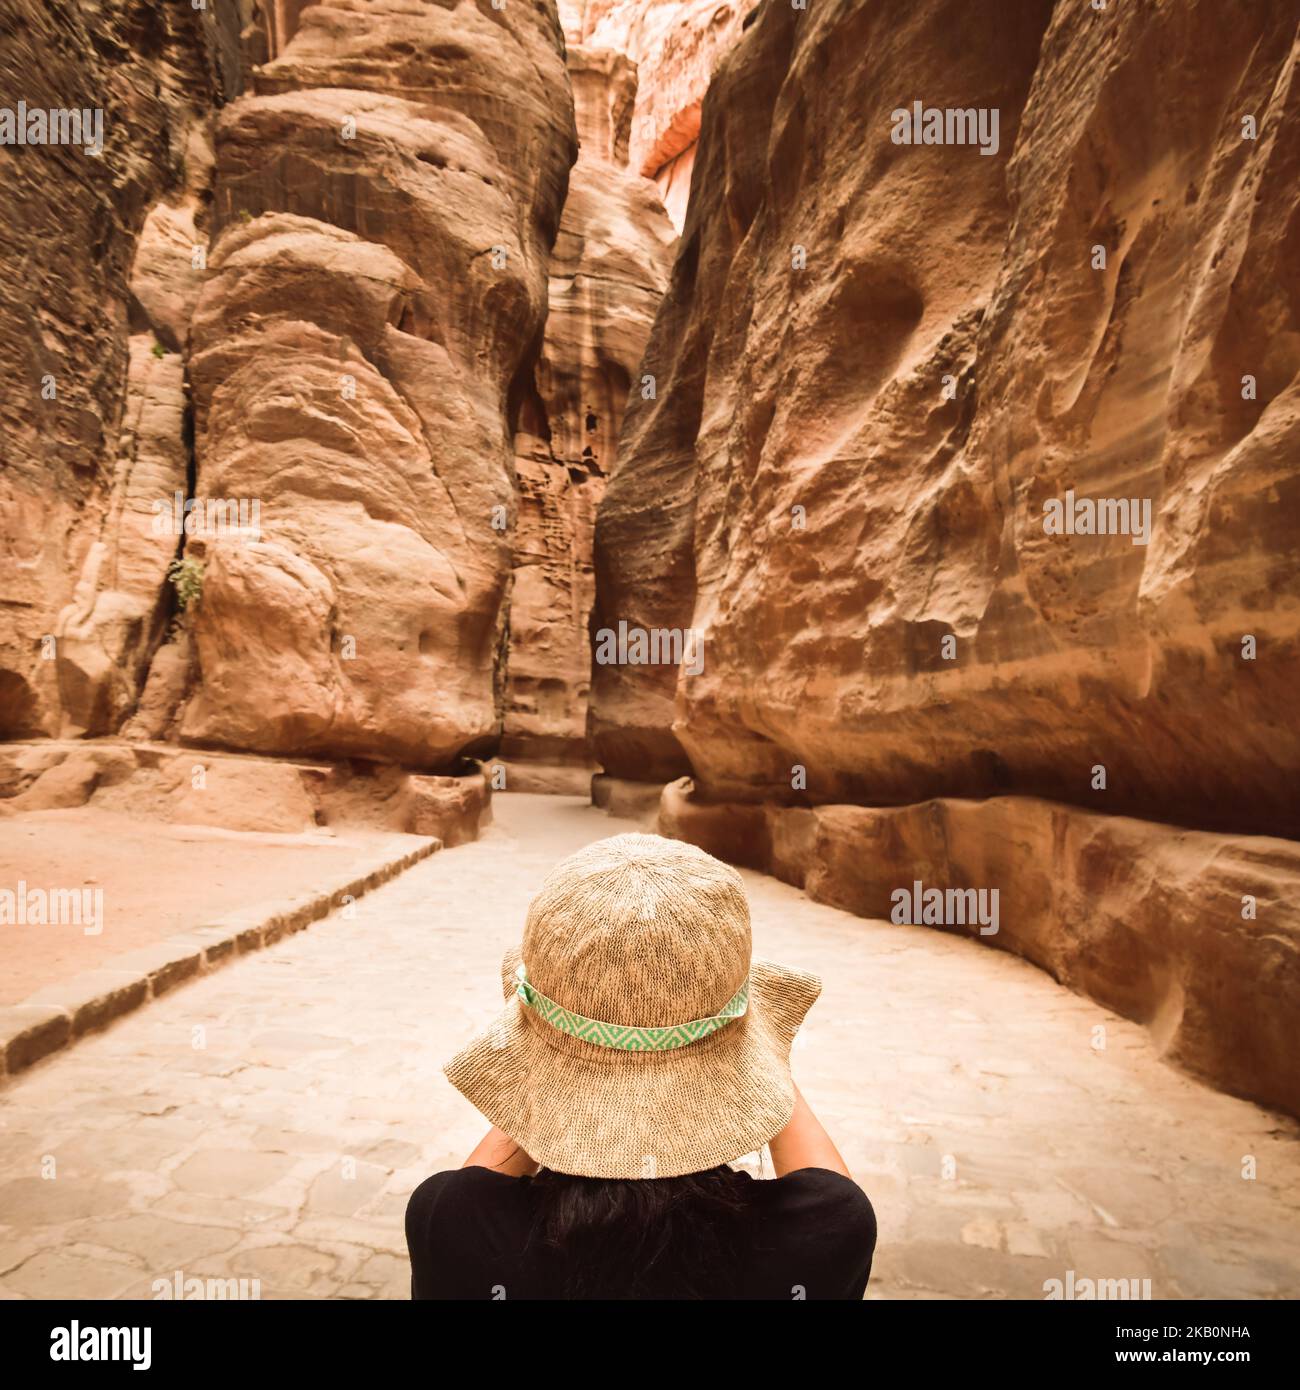 Tourist in Petra take photograph of The Siq, the narrow slot-canyon that serves as the entrance passage to the hidden city of Petra, Jordan Stock Photo